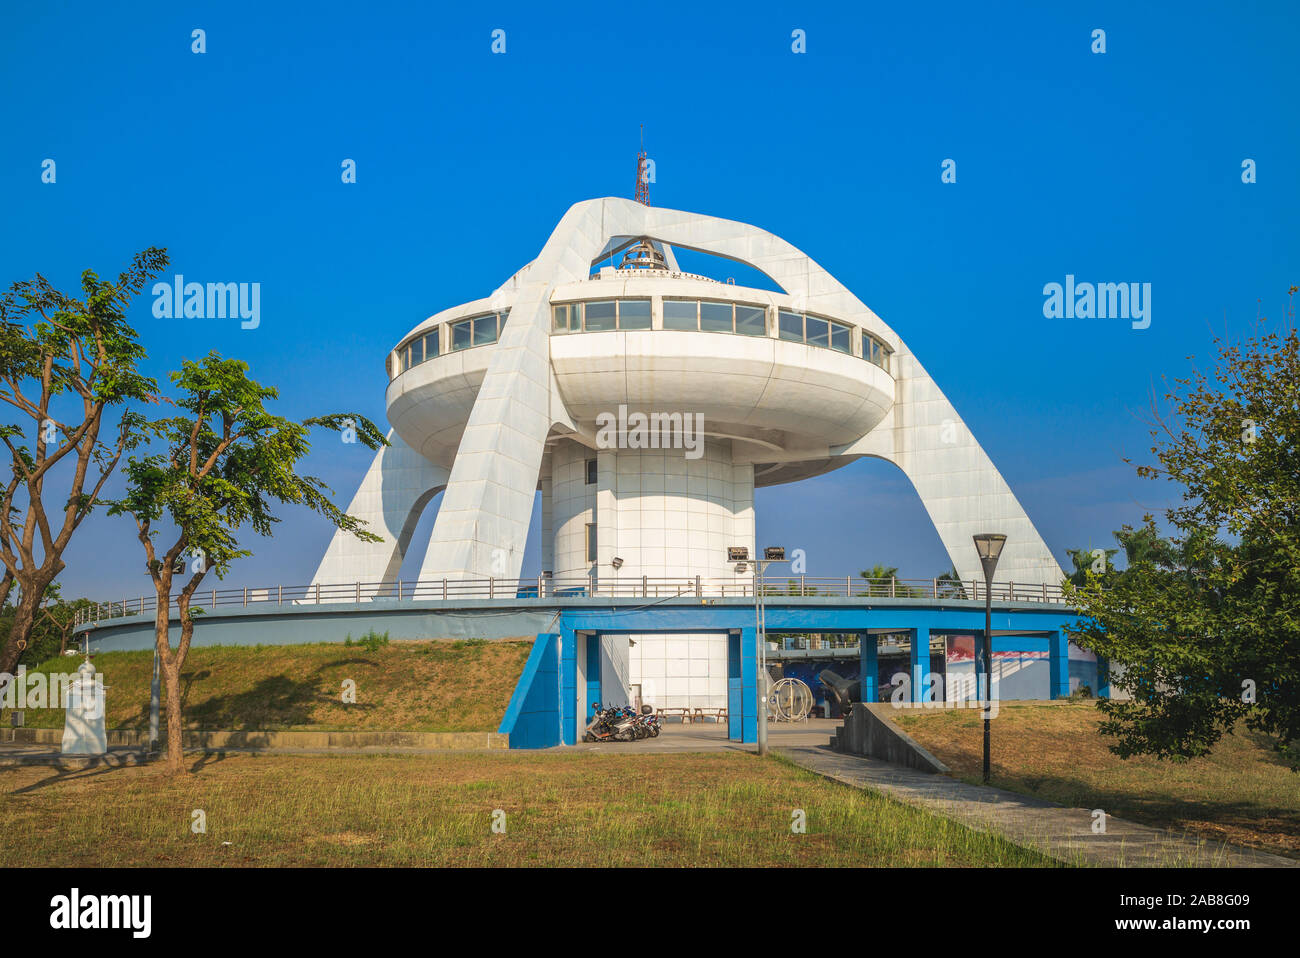 chiayi, taiwan - November 24, 2019: solar exploration center, a landmark open in October 25, 2005 to go with the 6th generation of the Chiayi Tropic o Stock Photo